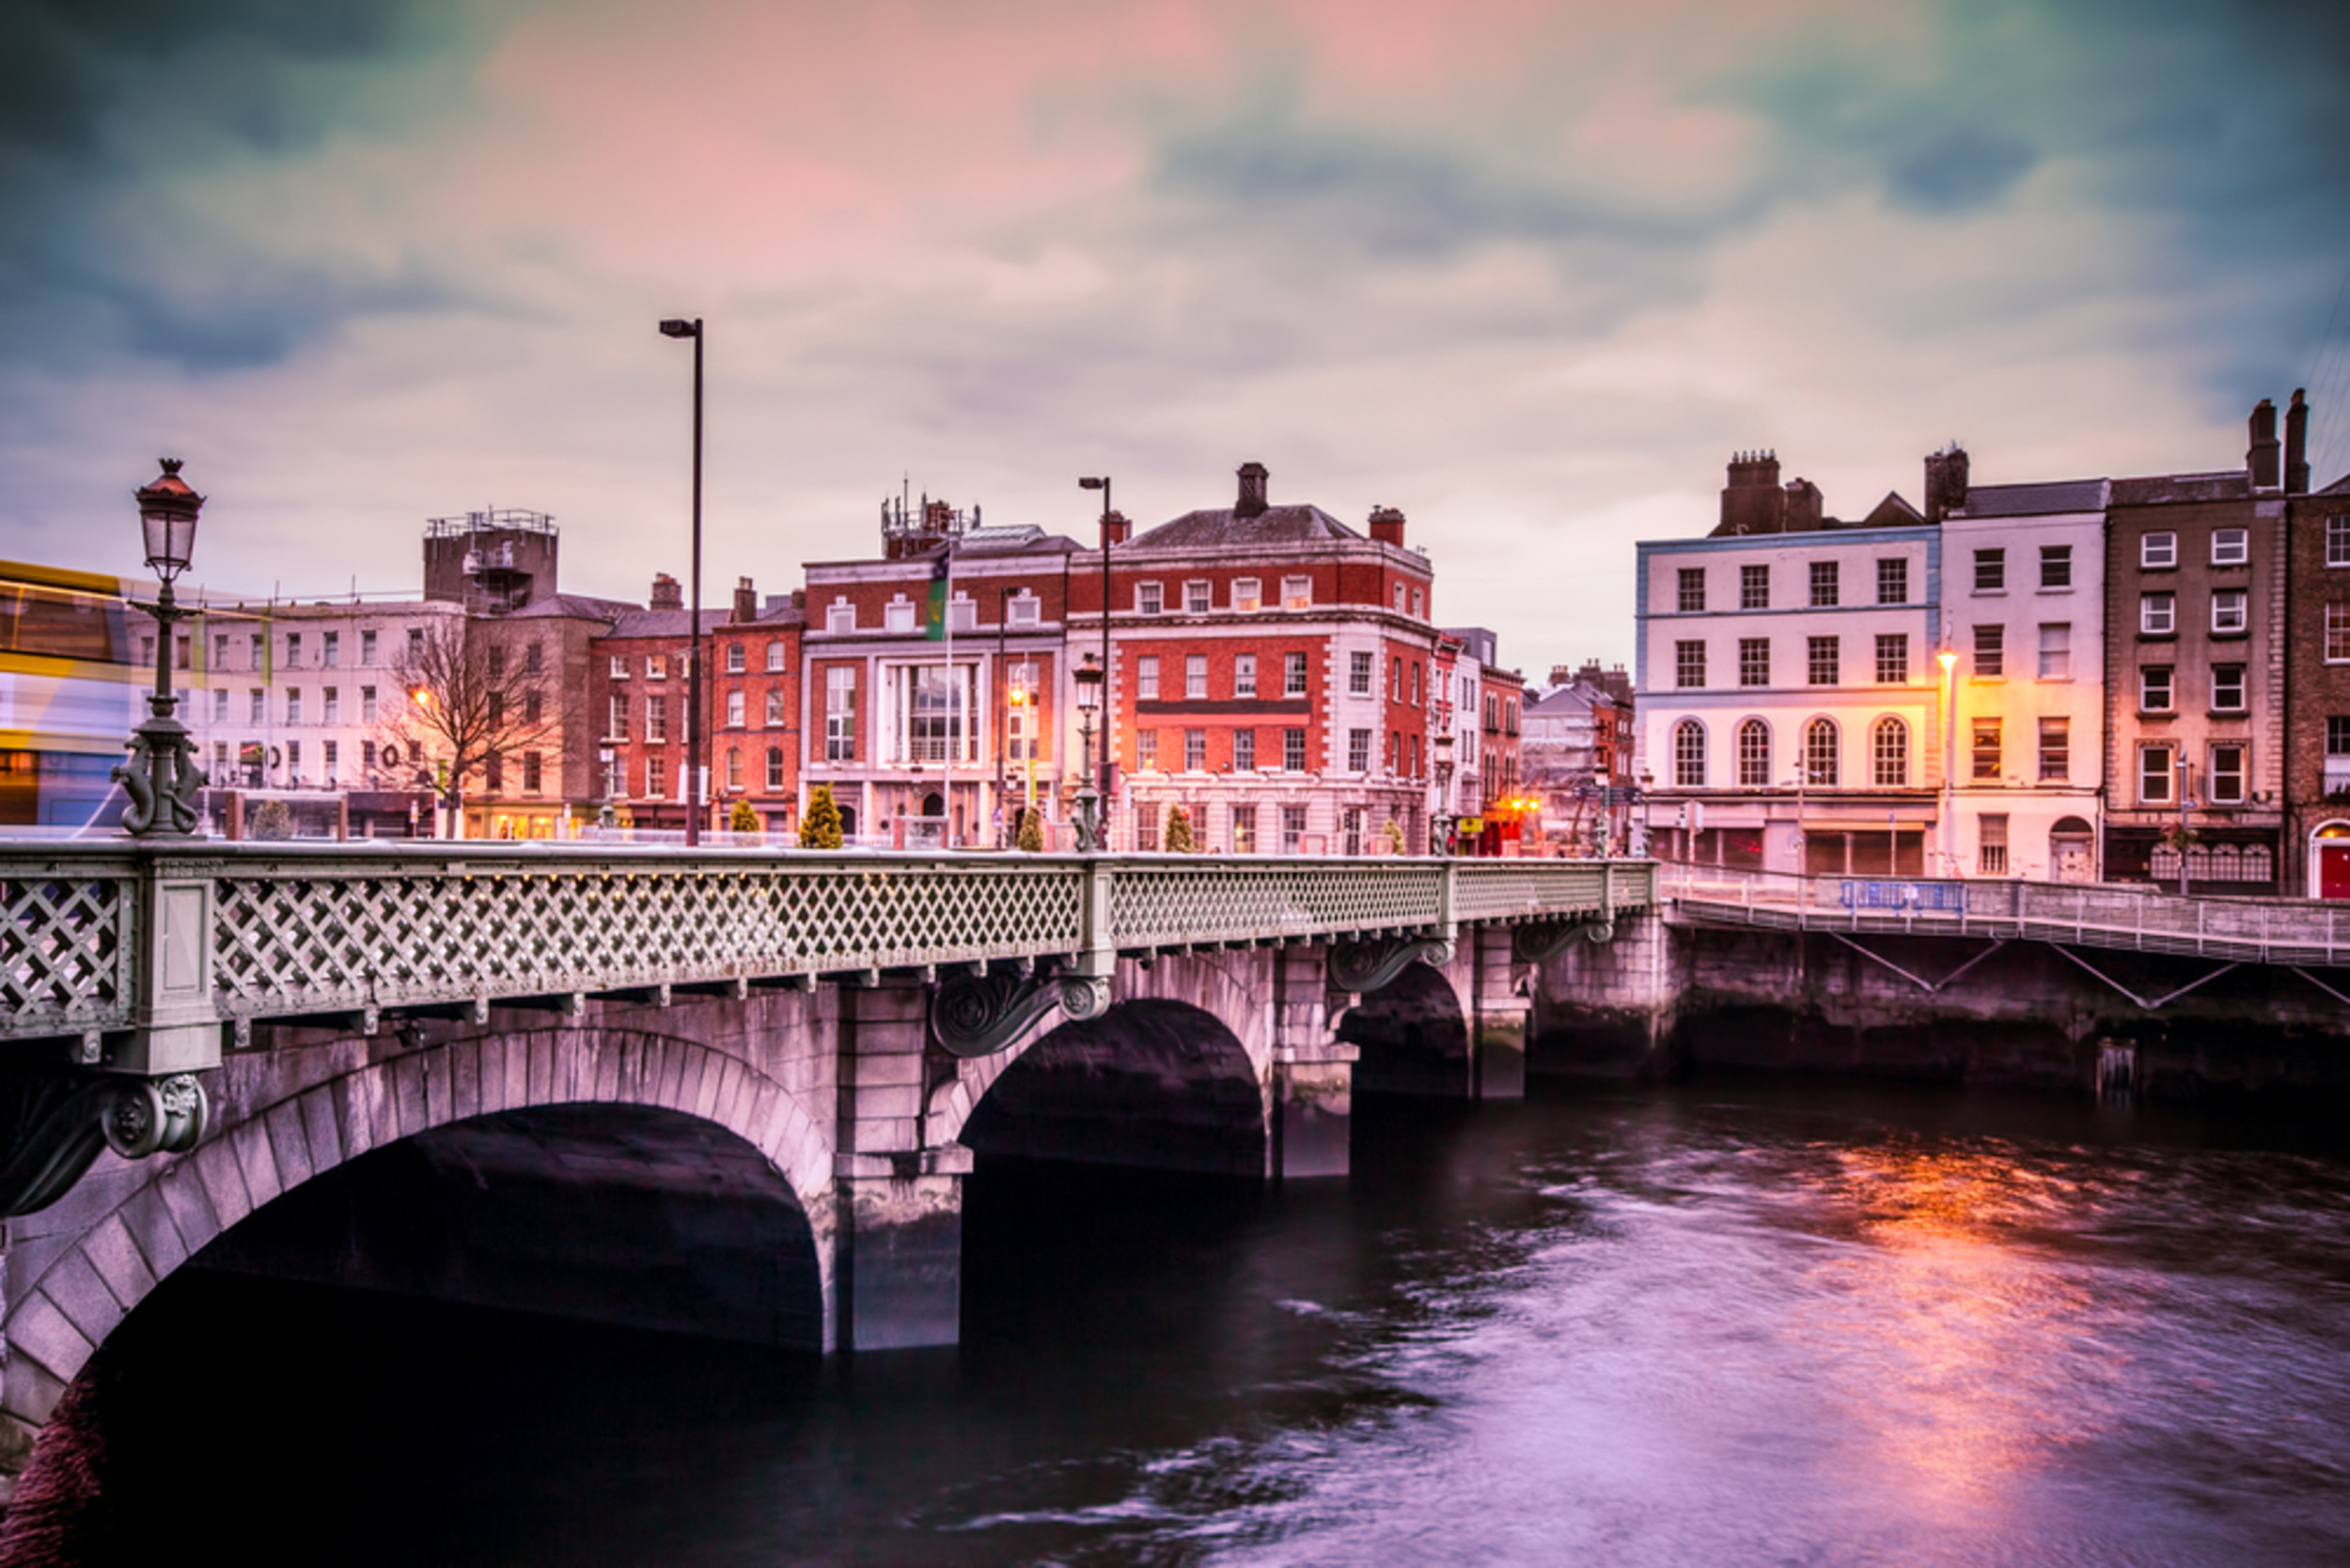 <p>Thanks to its incredible wealth of historic sites and convivial culture, Dublin is a must-visit city. You will, of course, want to sip a pint of Guinness in a pub or two, along with a stop to see the legendary Long Room at Trinity College's library. </p><p>You may also like: <a href='https://www.yardbarker.com/lifestyle/articles/12_high_fat_foods_you_should_avoid_and_12_you_should_eat_regularly_110623/s1__39147466'>12 high-fat foods you should avoid and 12 you should eat regularly</a></p>